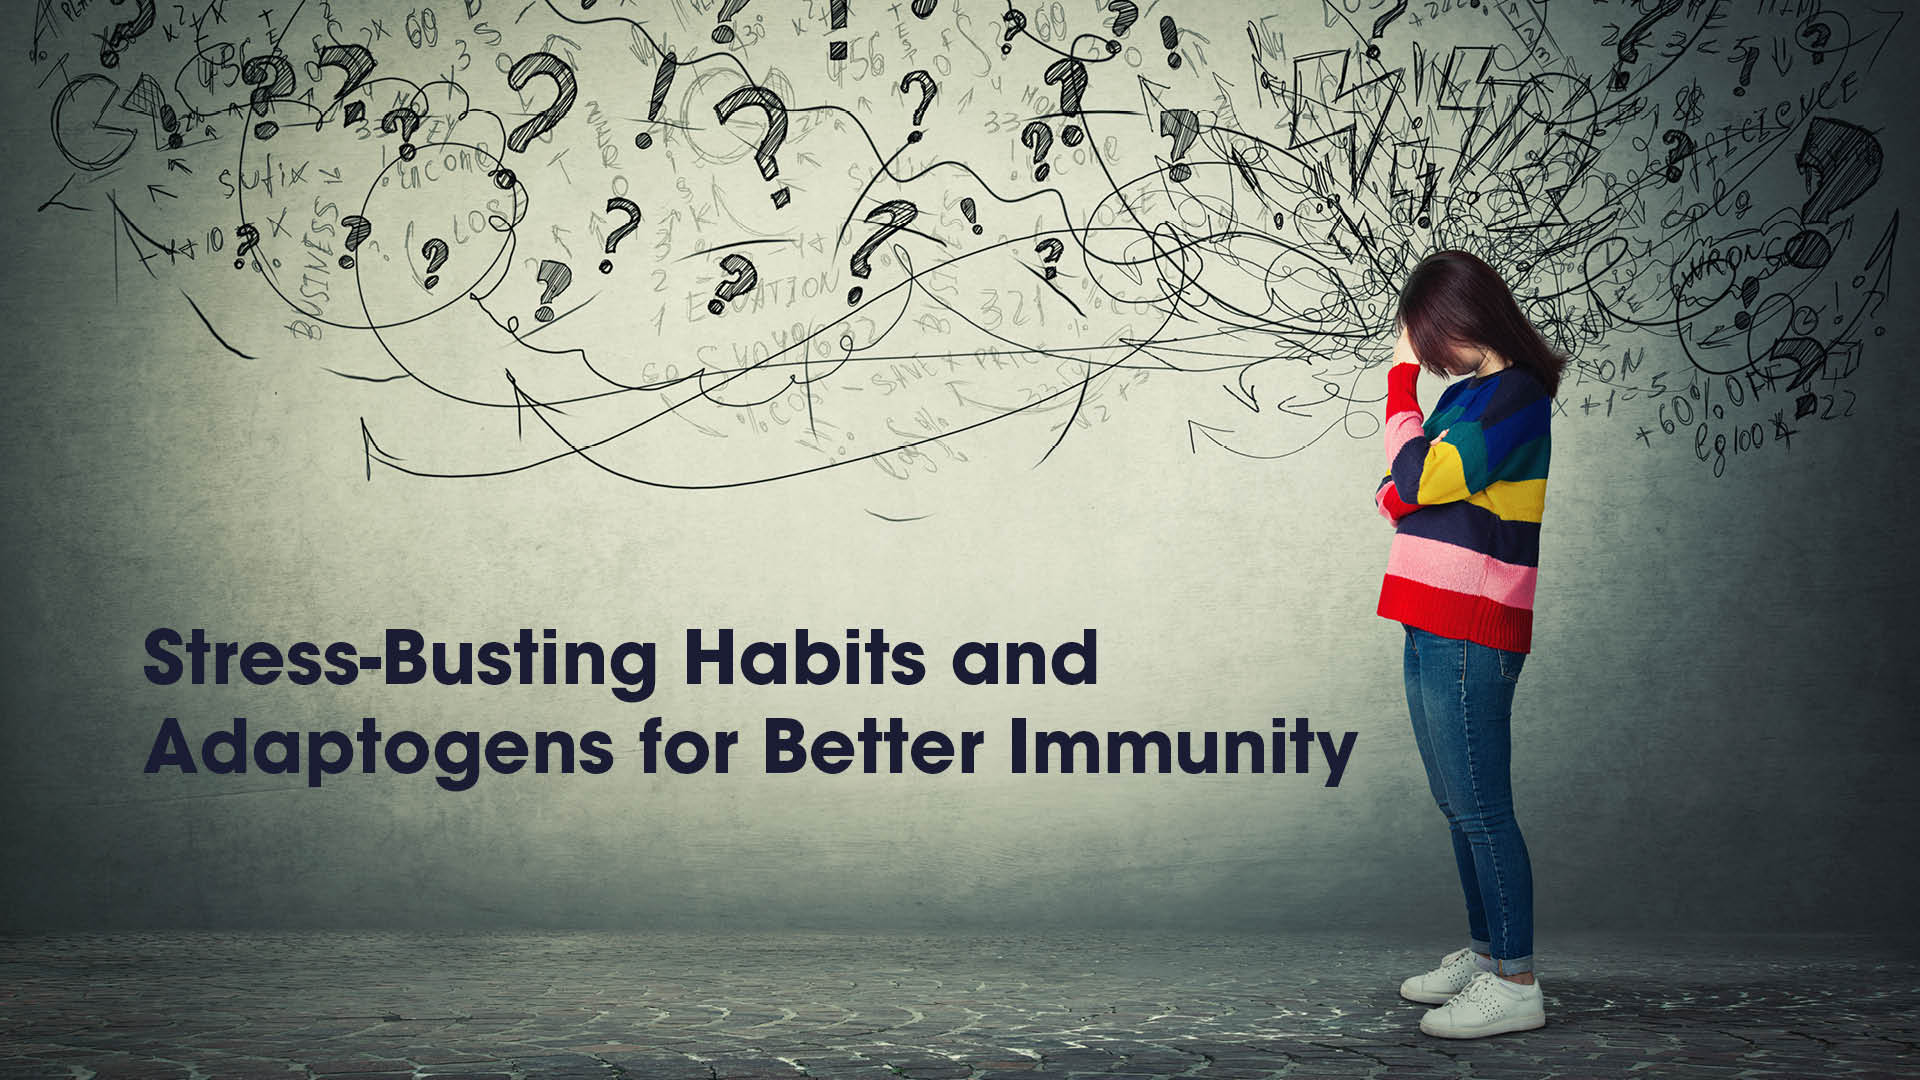 Stress-Busting Habits and Adaptogens for Better Immunity